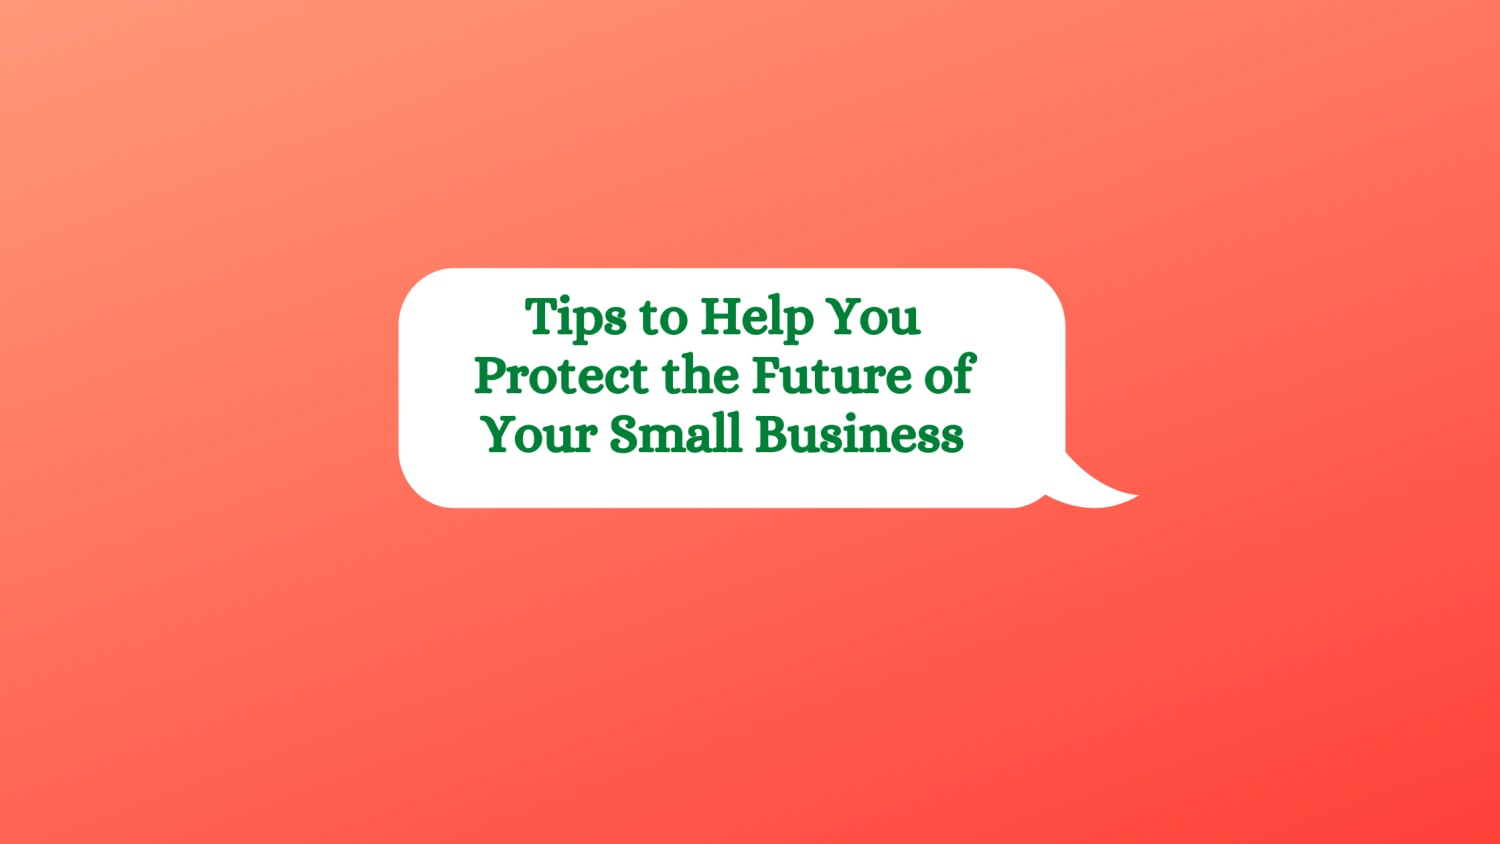 Tips to Help You Protect the Future of Your Small Business